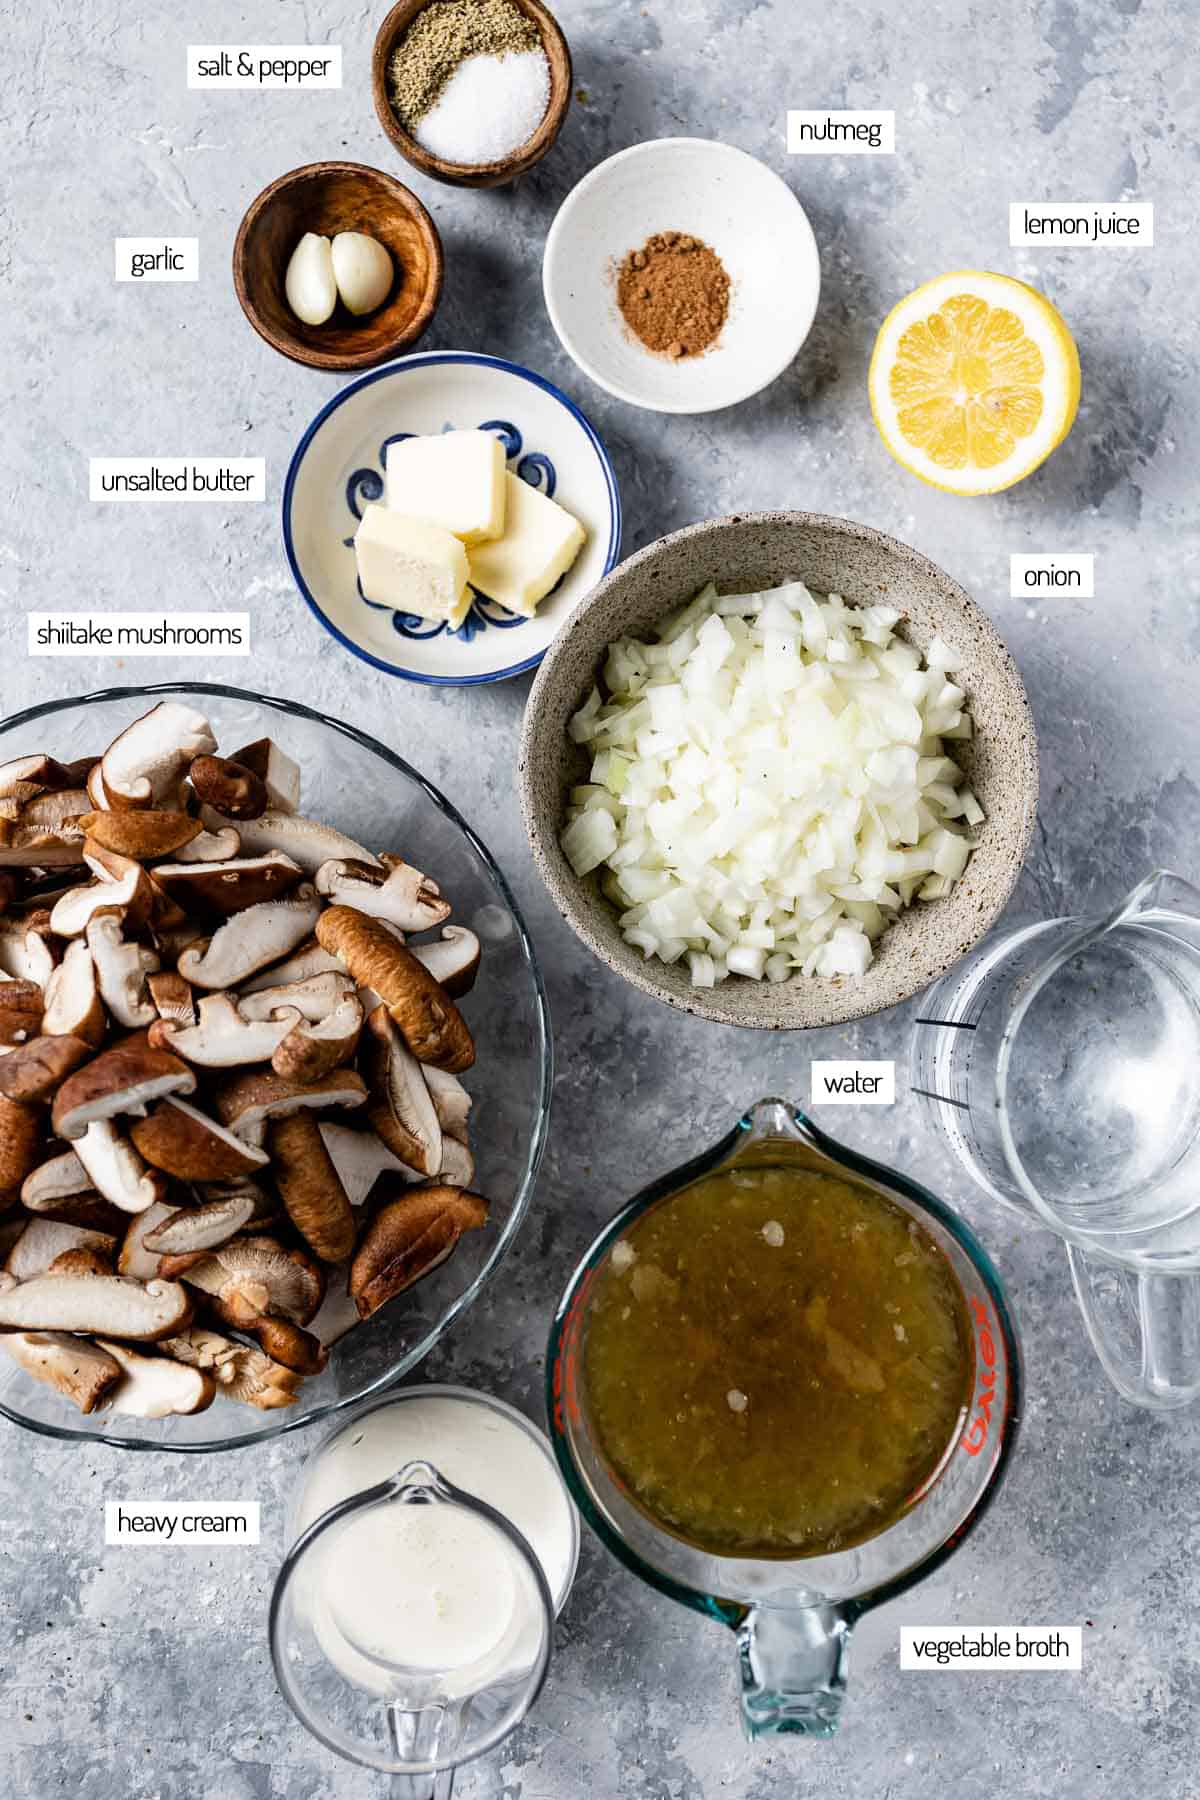 Ingredients for a fresh shiitake mushroom soup in bowls from the top view.